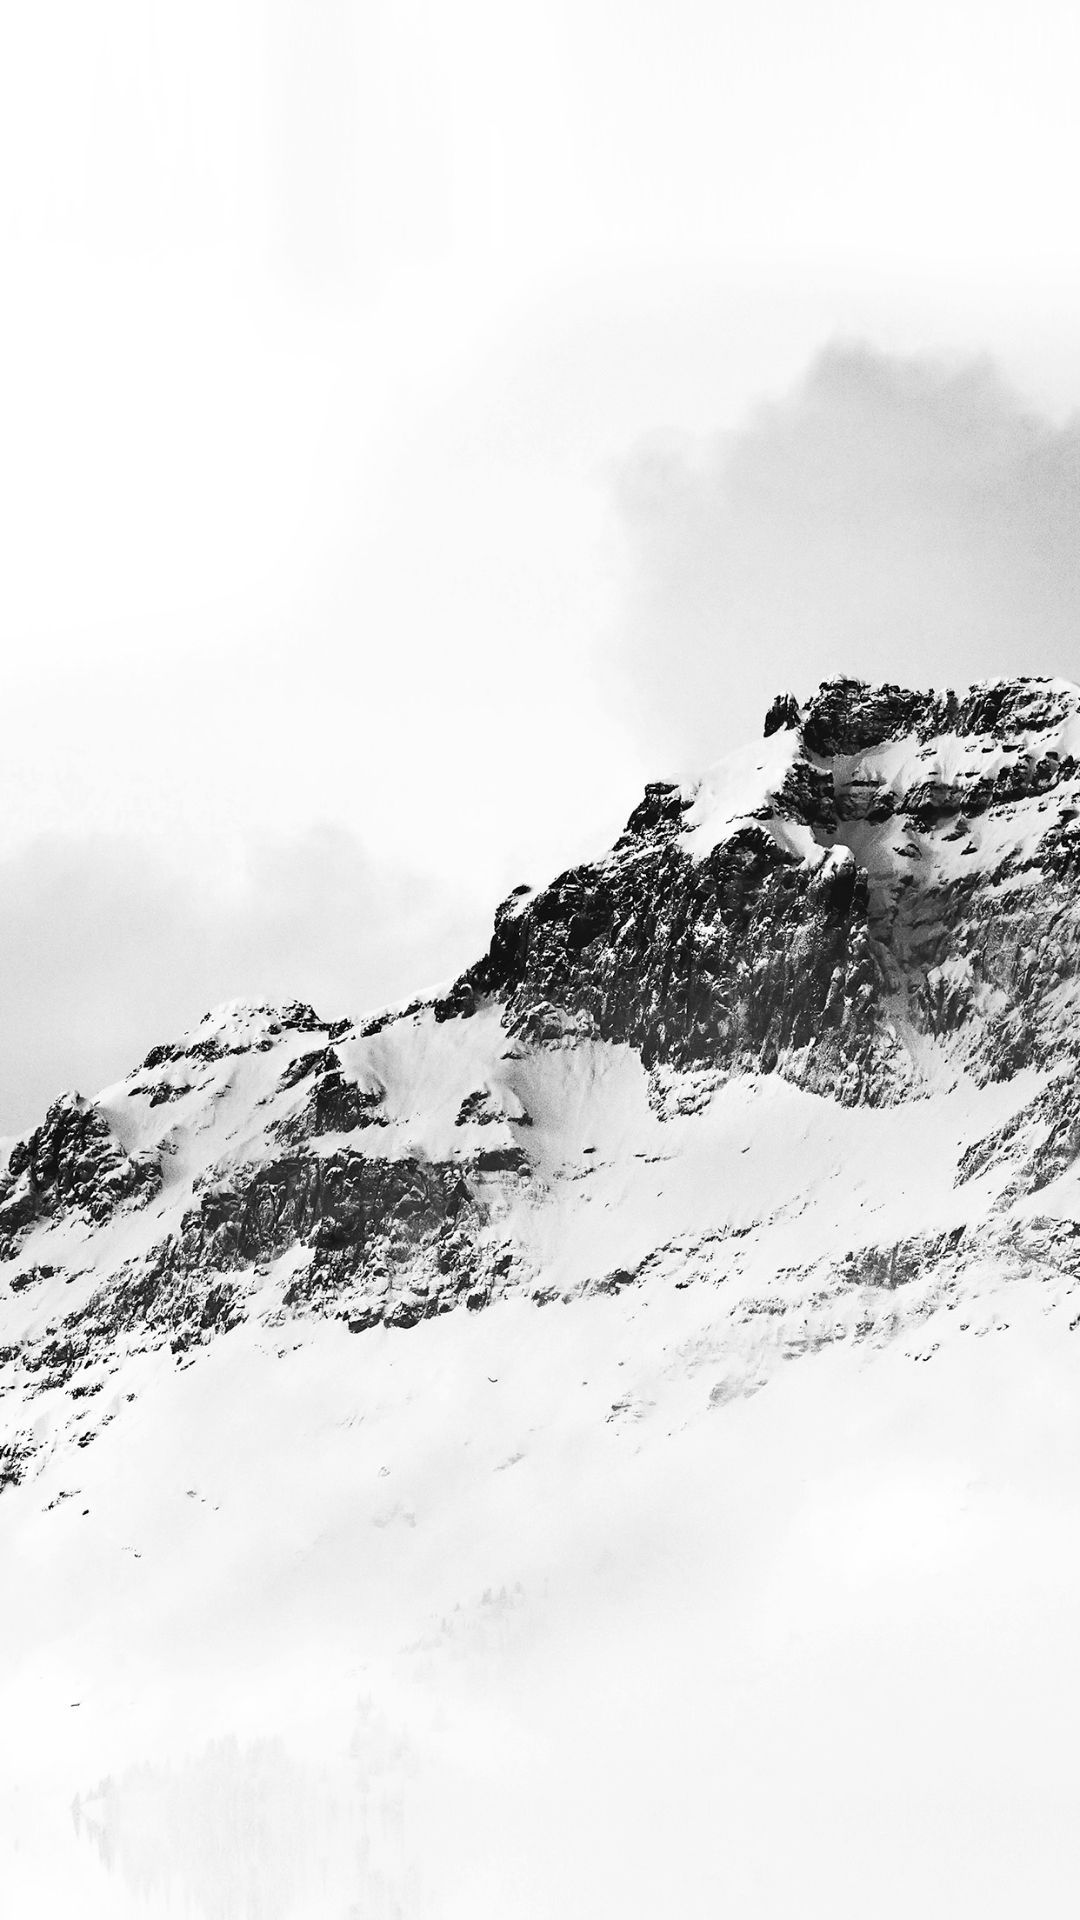 A person is riding down the side of mountain - White, black and white